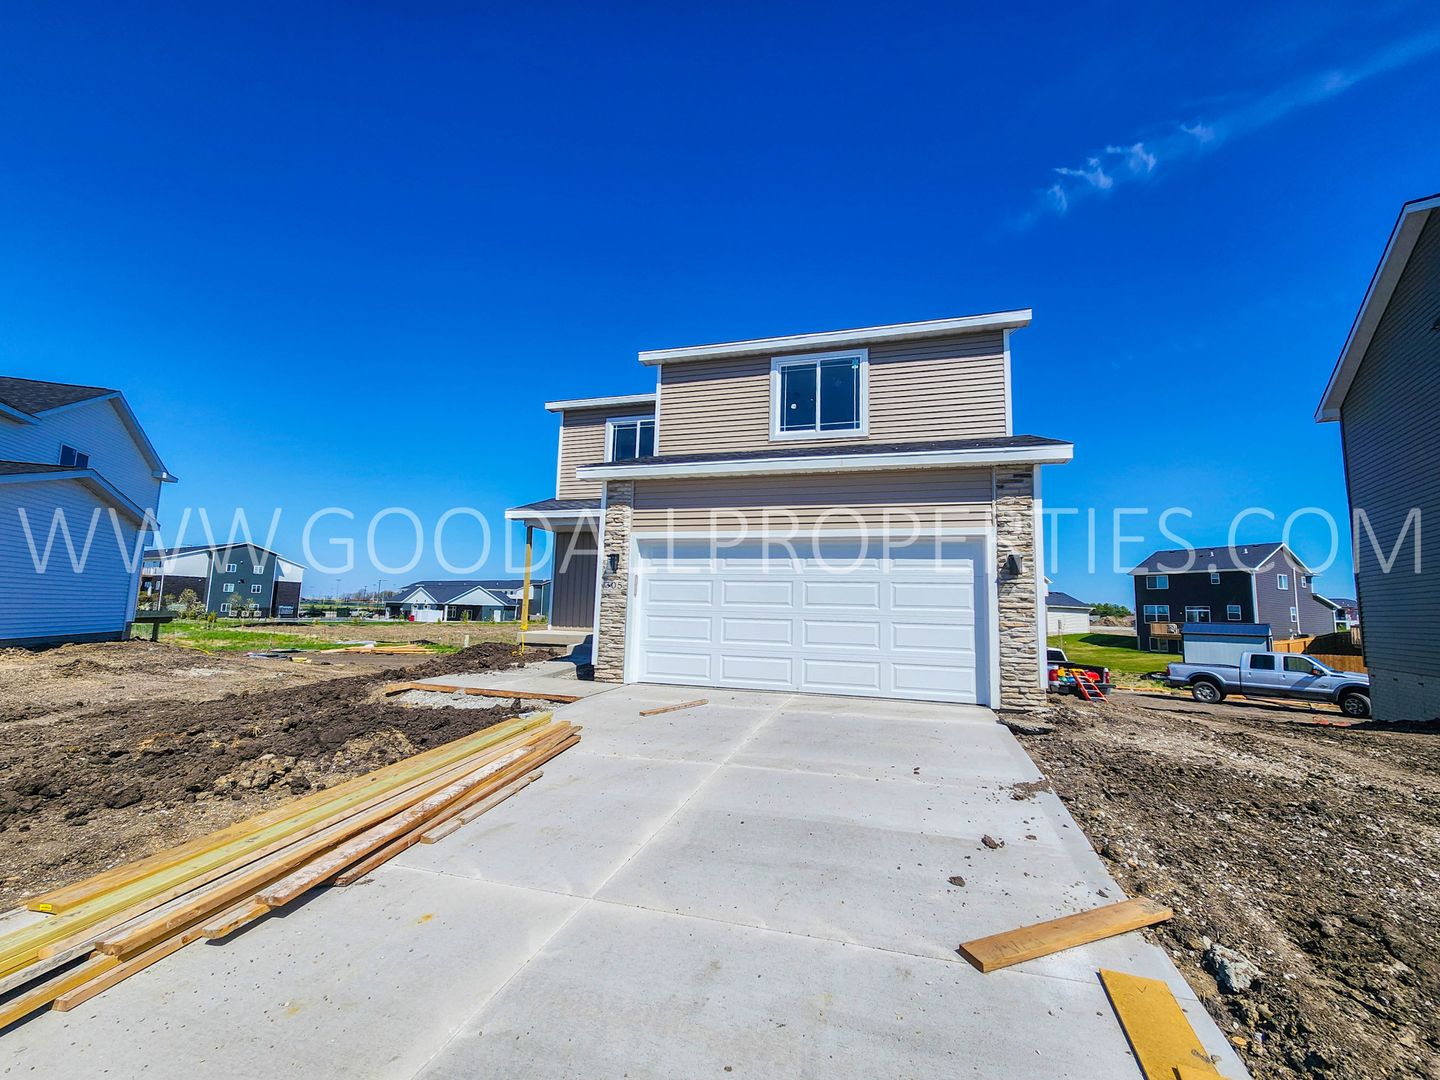 New 5 Bedroom home with a finished basement in Waukee